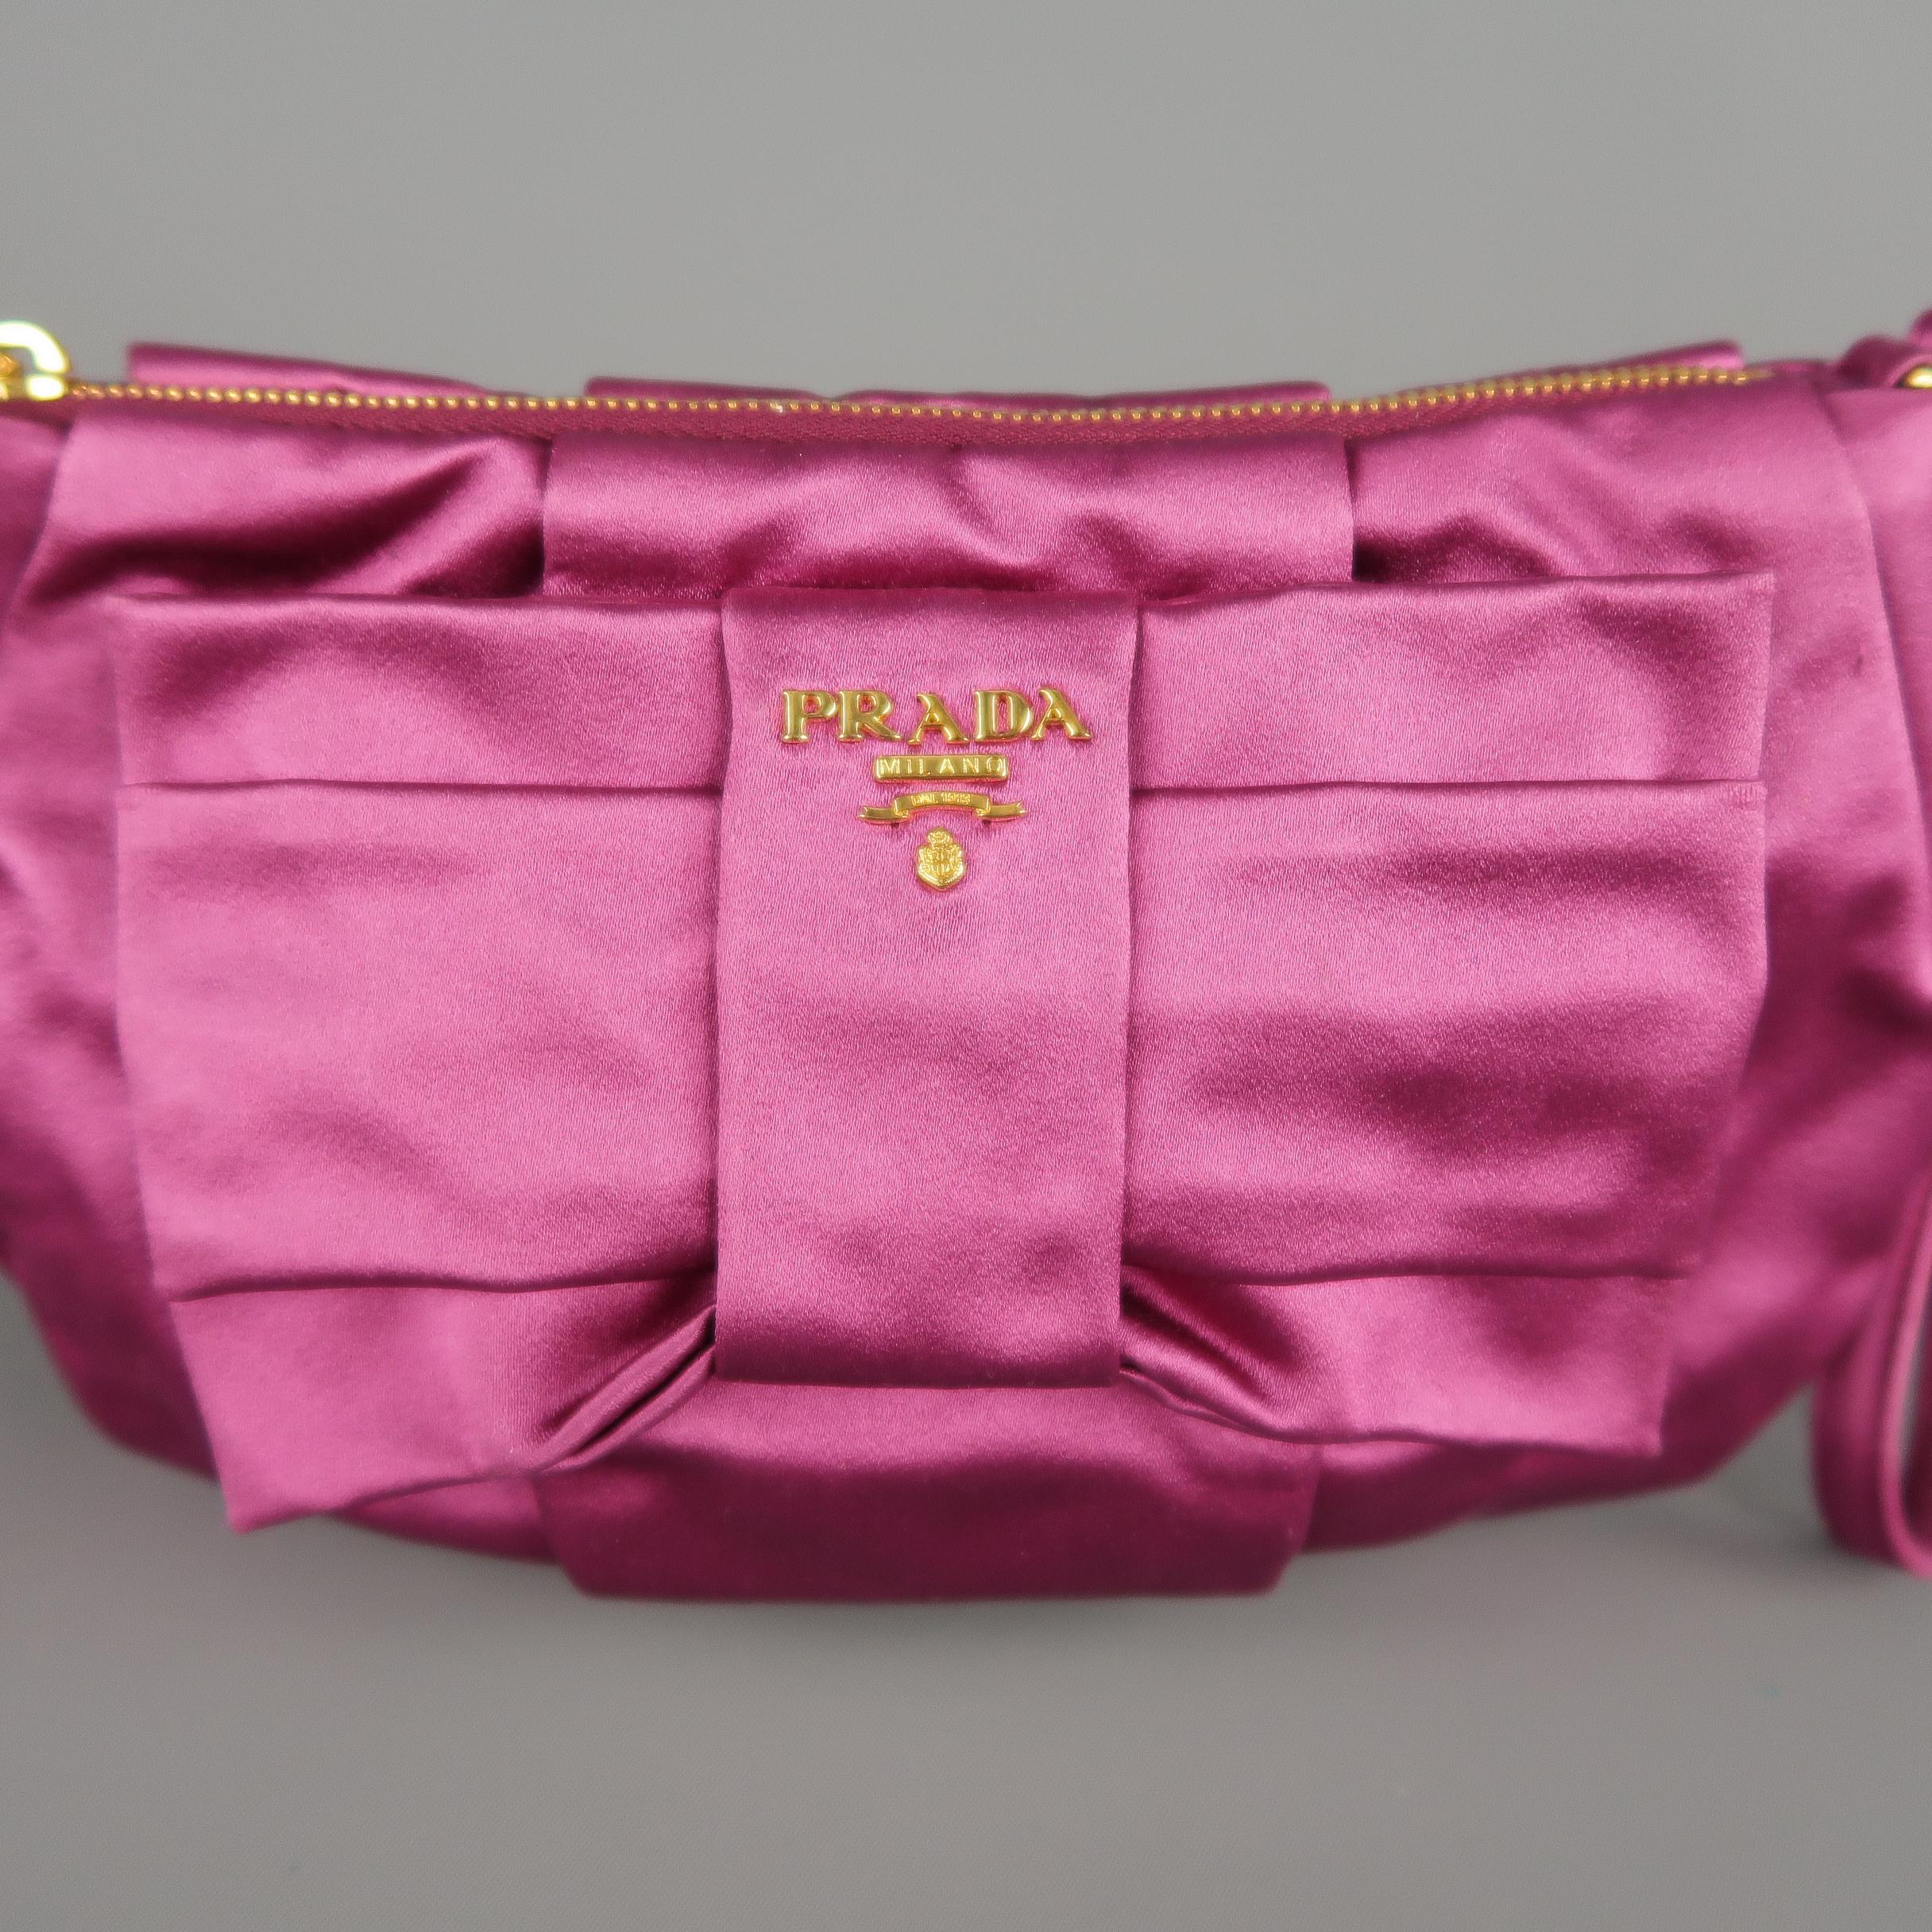 PRADA wristlet pouch bag comes in jewel tone pink silk satin with an oversized bow, gold tone metal logo, top zip, and detachable strap. Made in Italy.  Retail: $425.00
 
Excellent Pre-Owned Condition.
 
Measurements:
 
Length: 10 in.
Width: 1